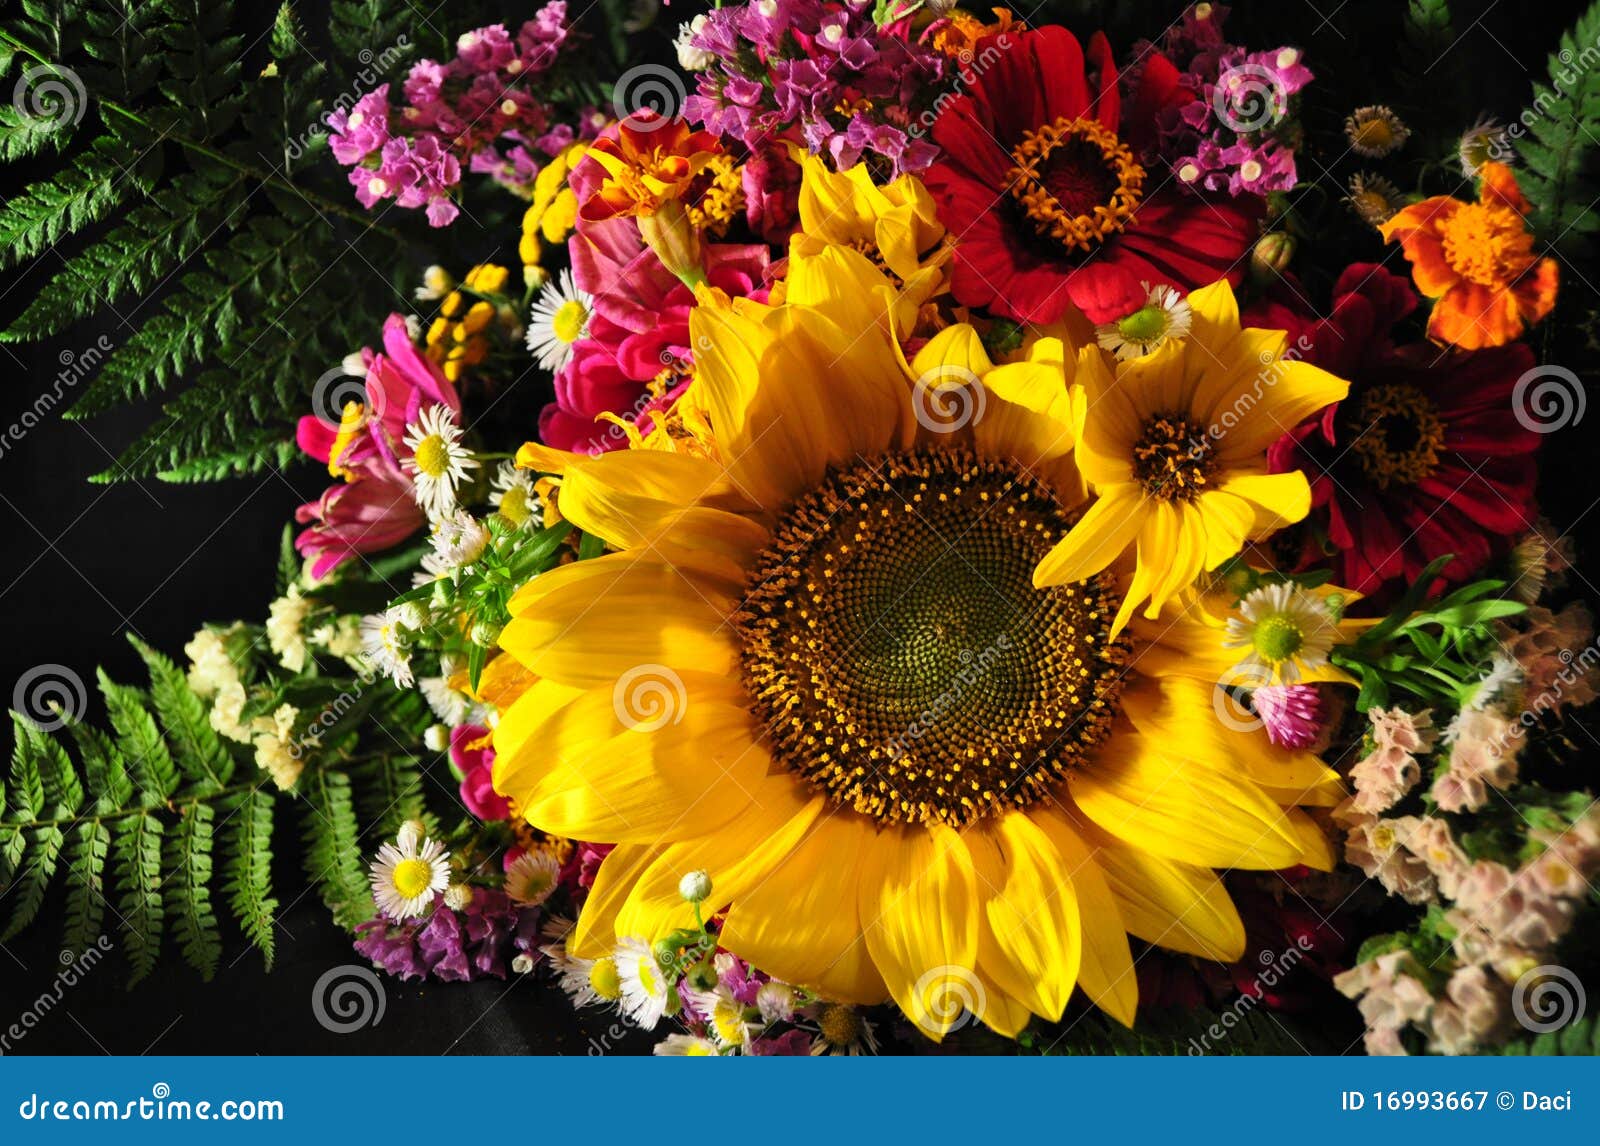 Autumn Flowers Royalty Free Stock Photography  Image 